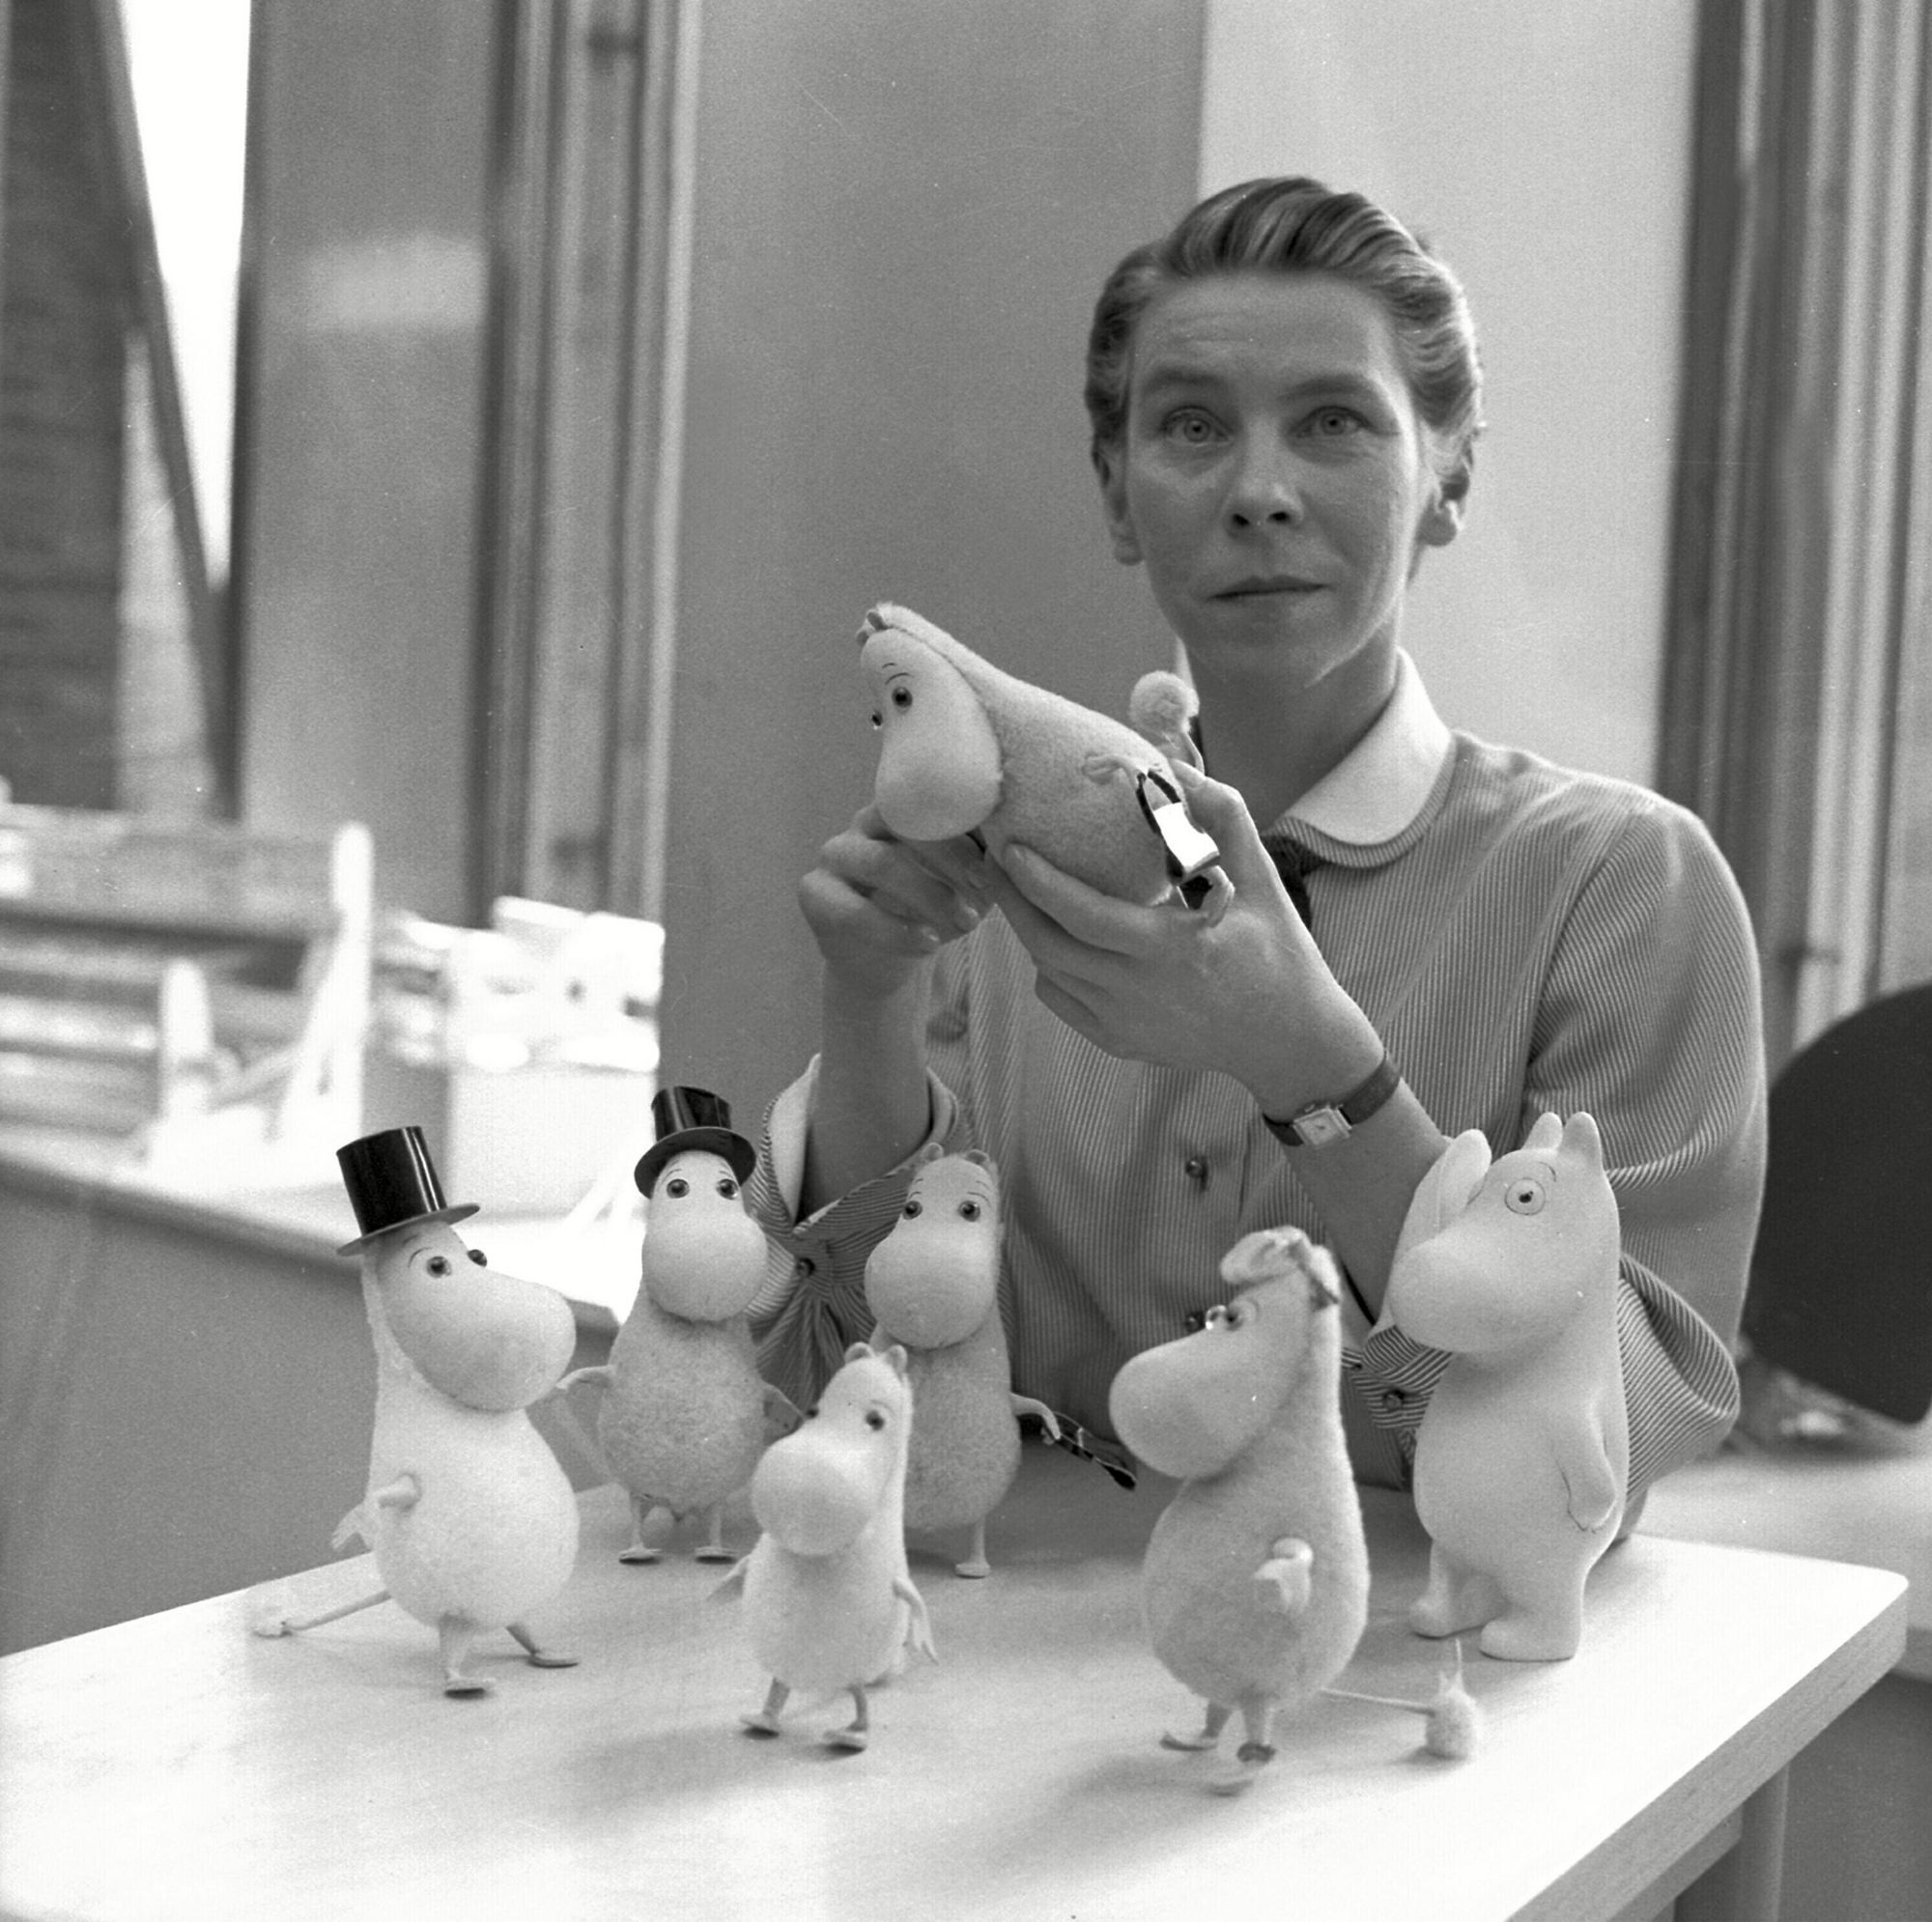 Artist Tove Jansson pictured in 1956 with the famous Moomin figures she created.